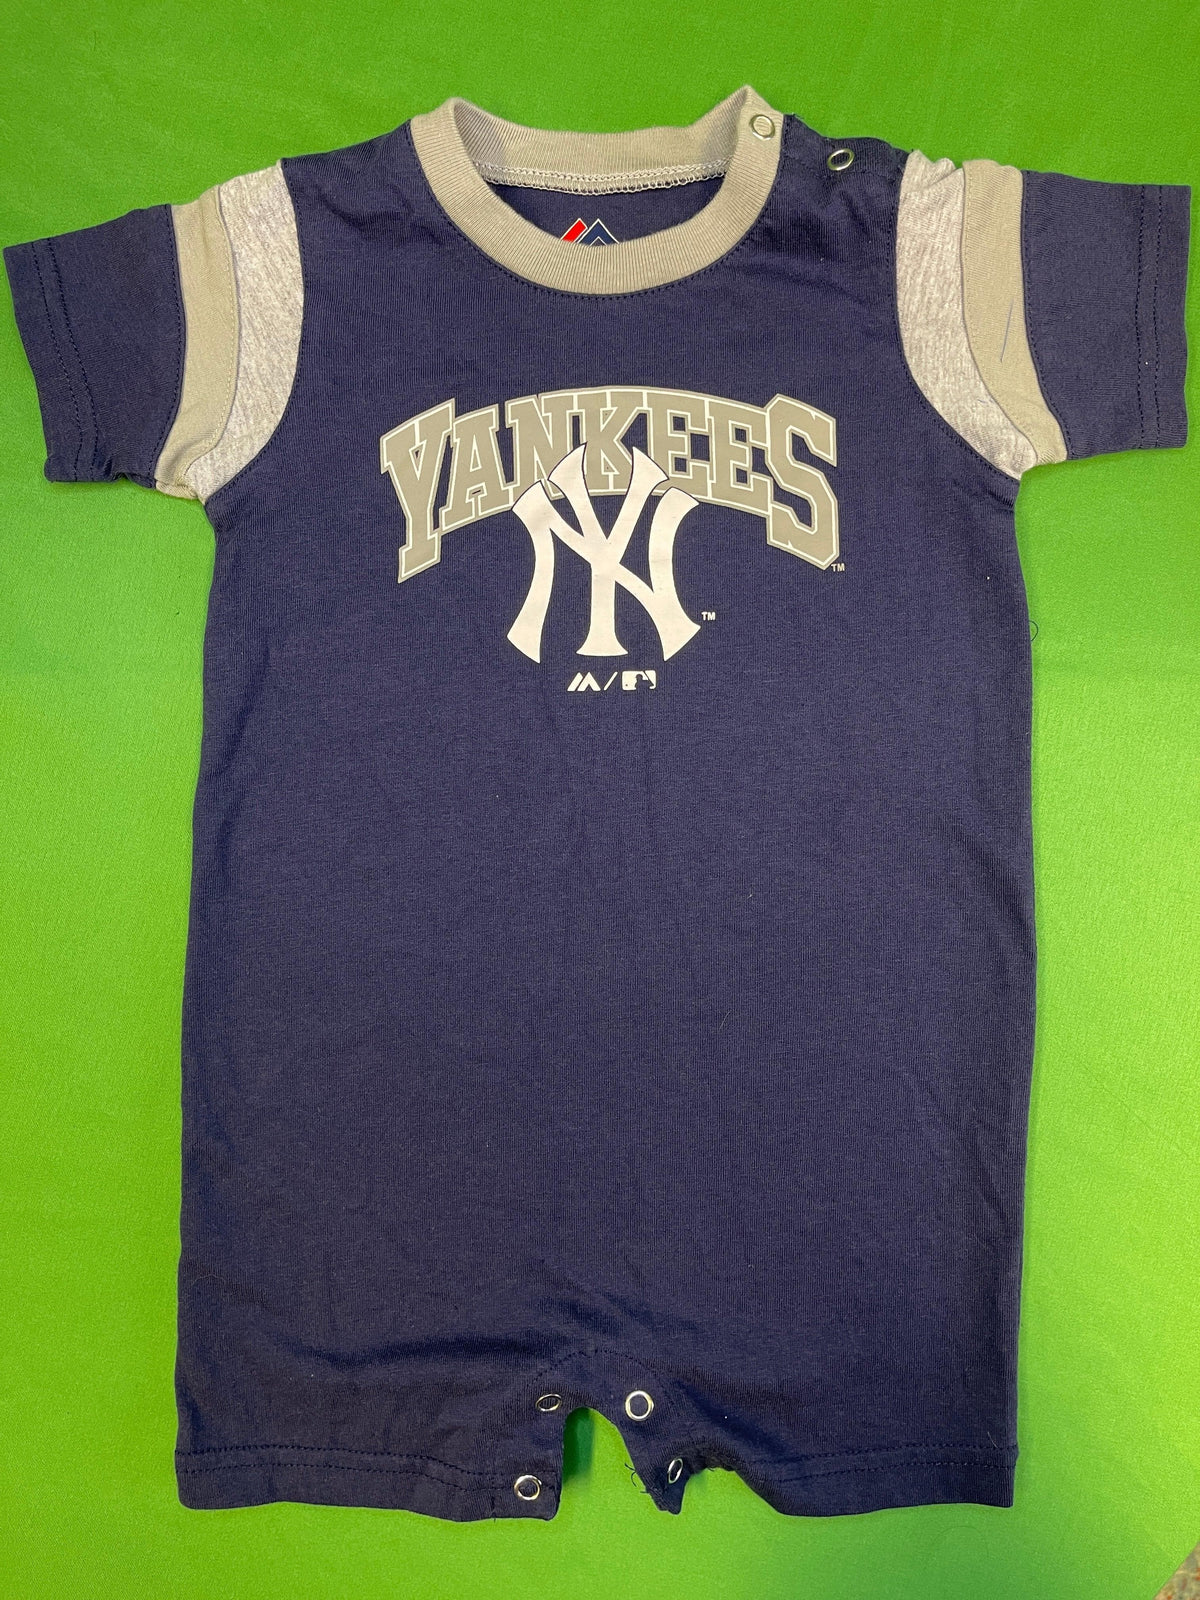 MLB New York Yankees Majestic Toddler Infant Playsuit 24 months